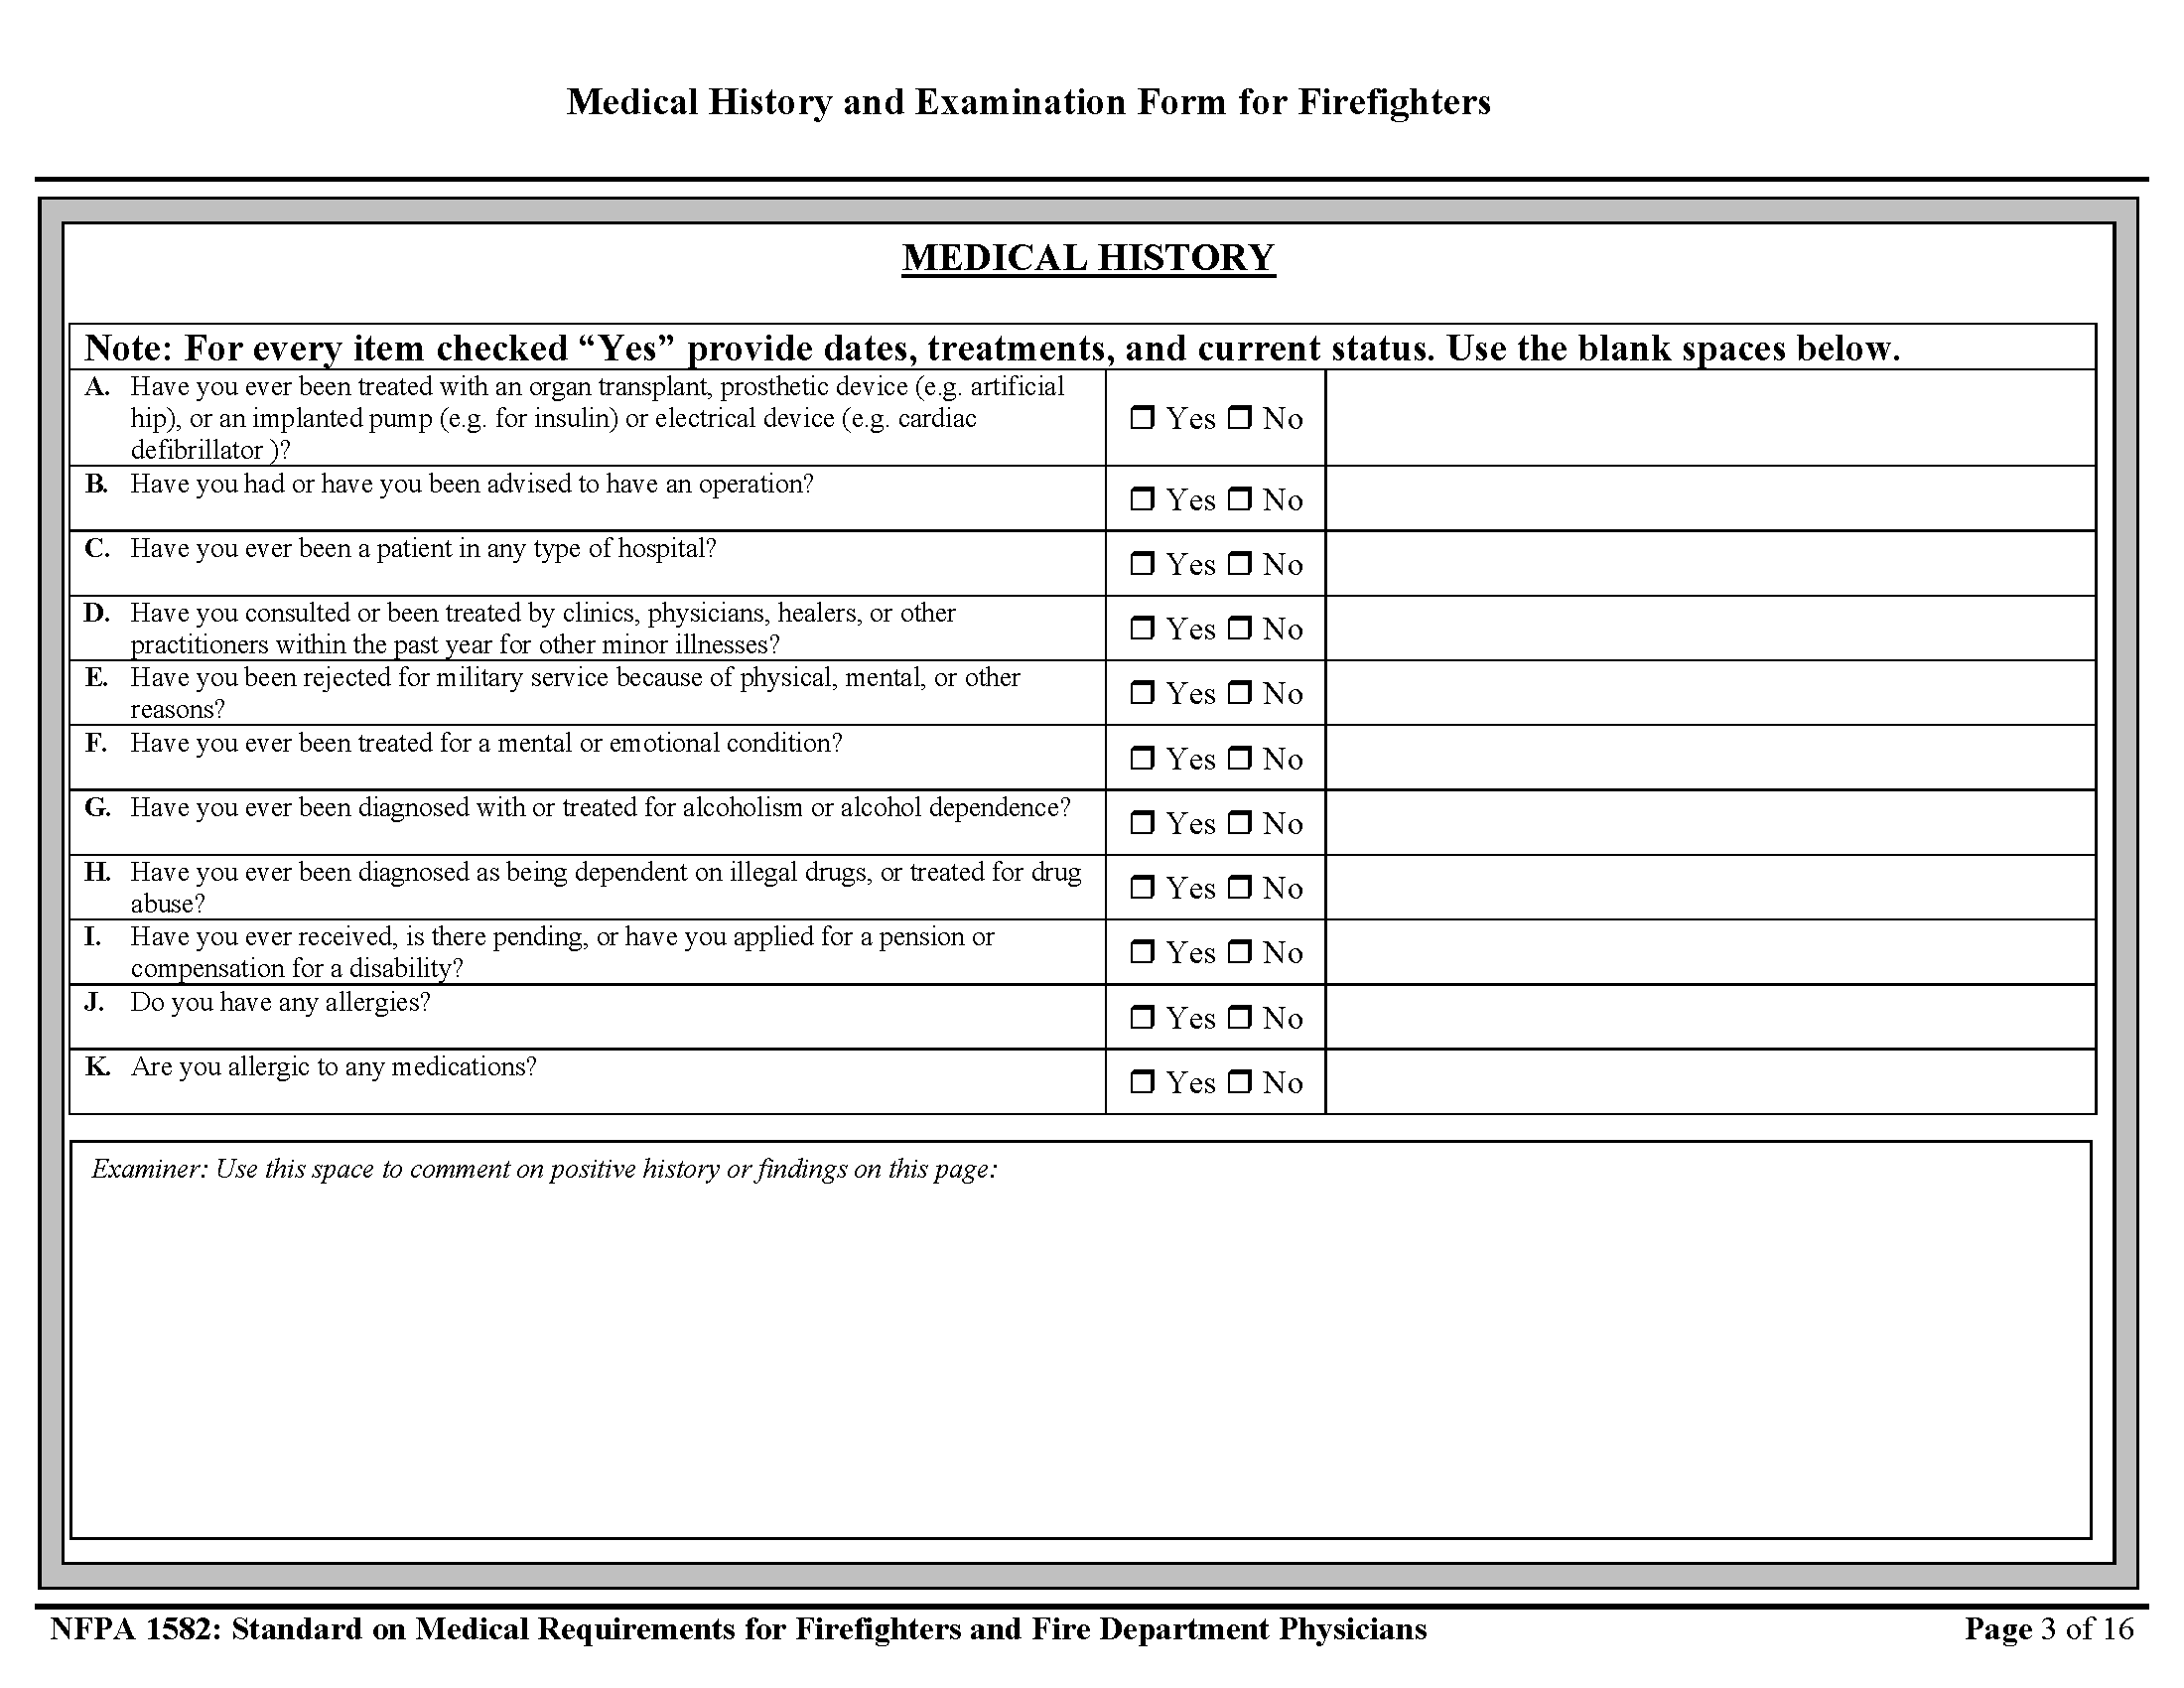 nfpa-form-1582-firefighter-physical-brown-clermont-adult-career